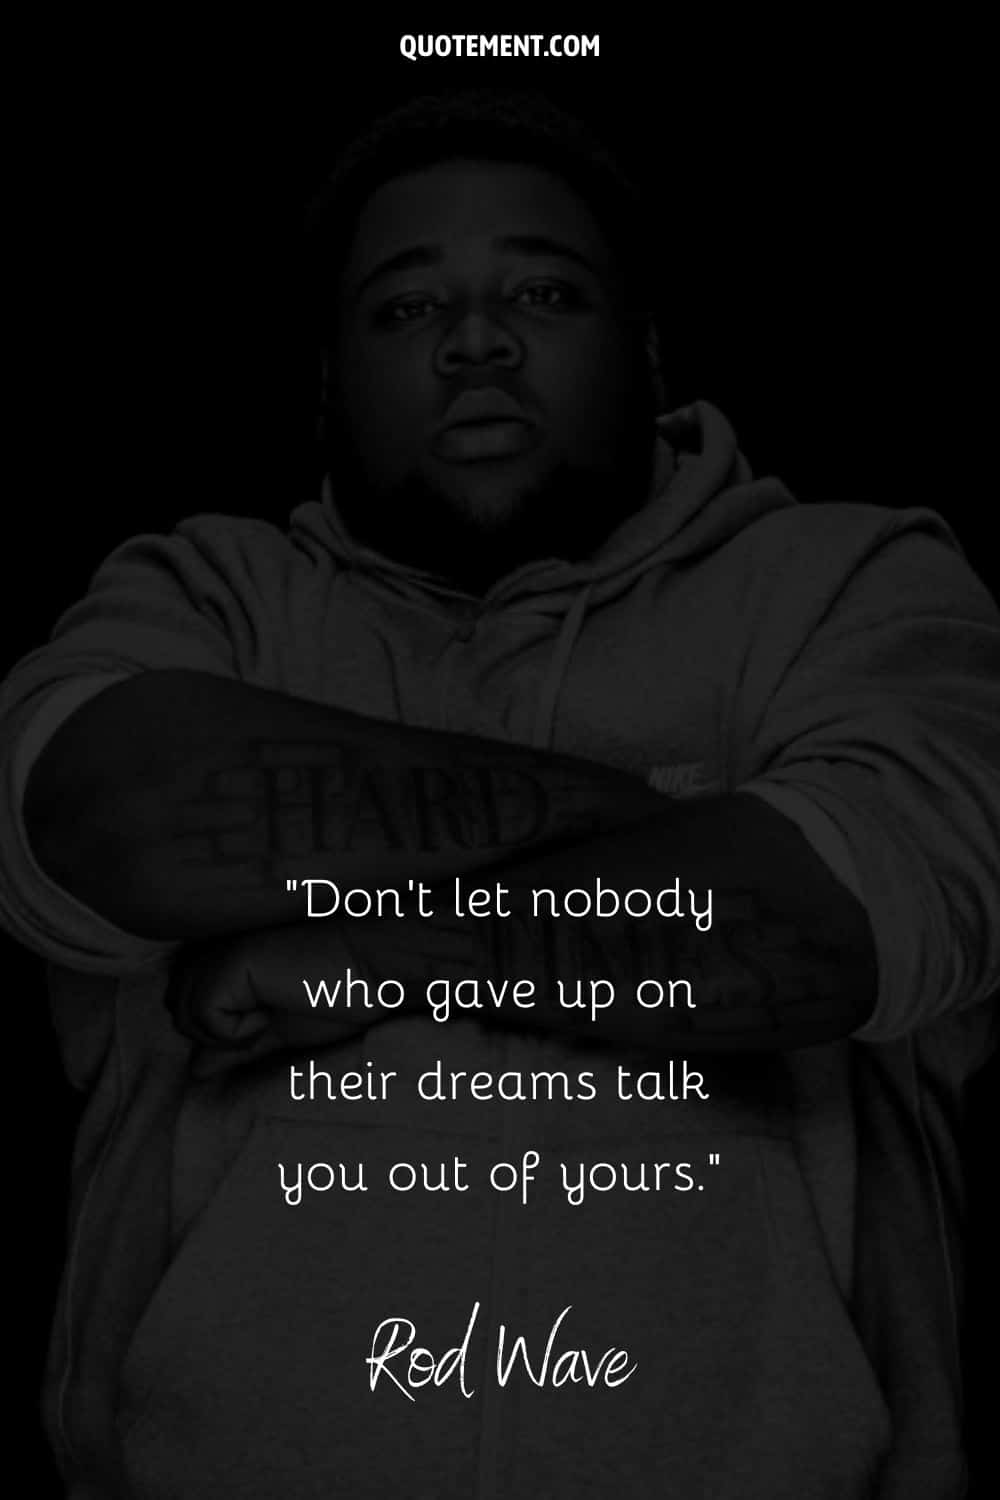 “Don’t let nobody who gave up on their dreams talk you out of yours.” — Rod Wave